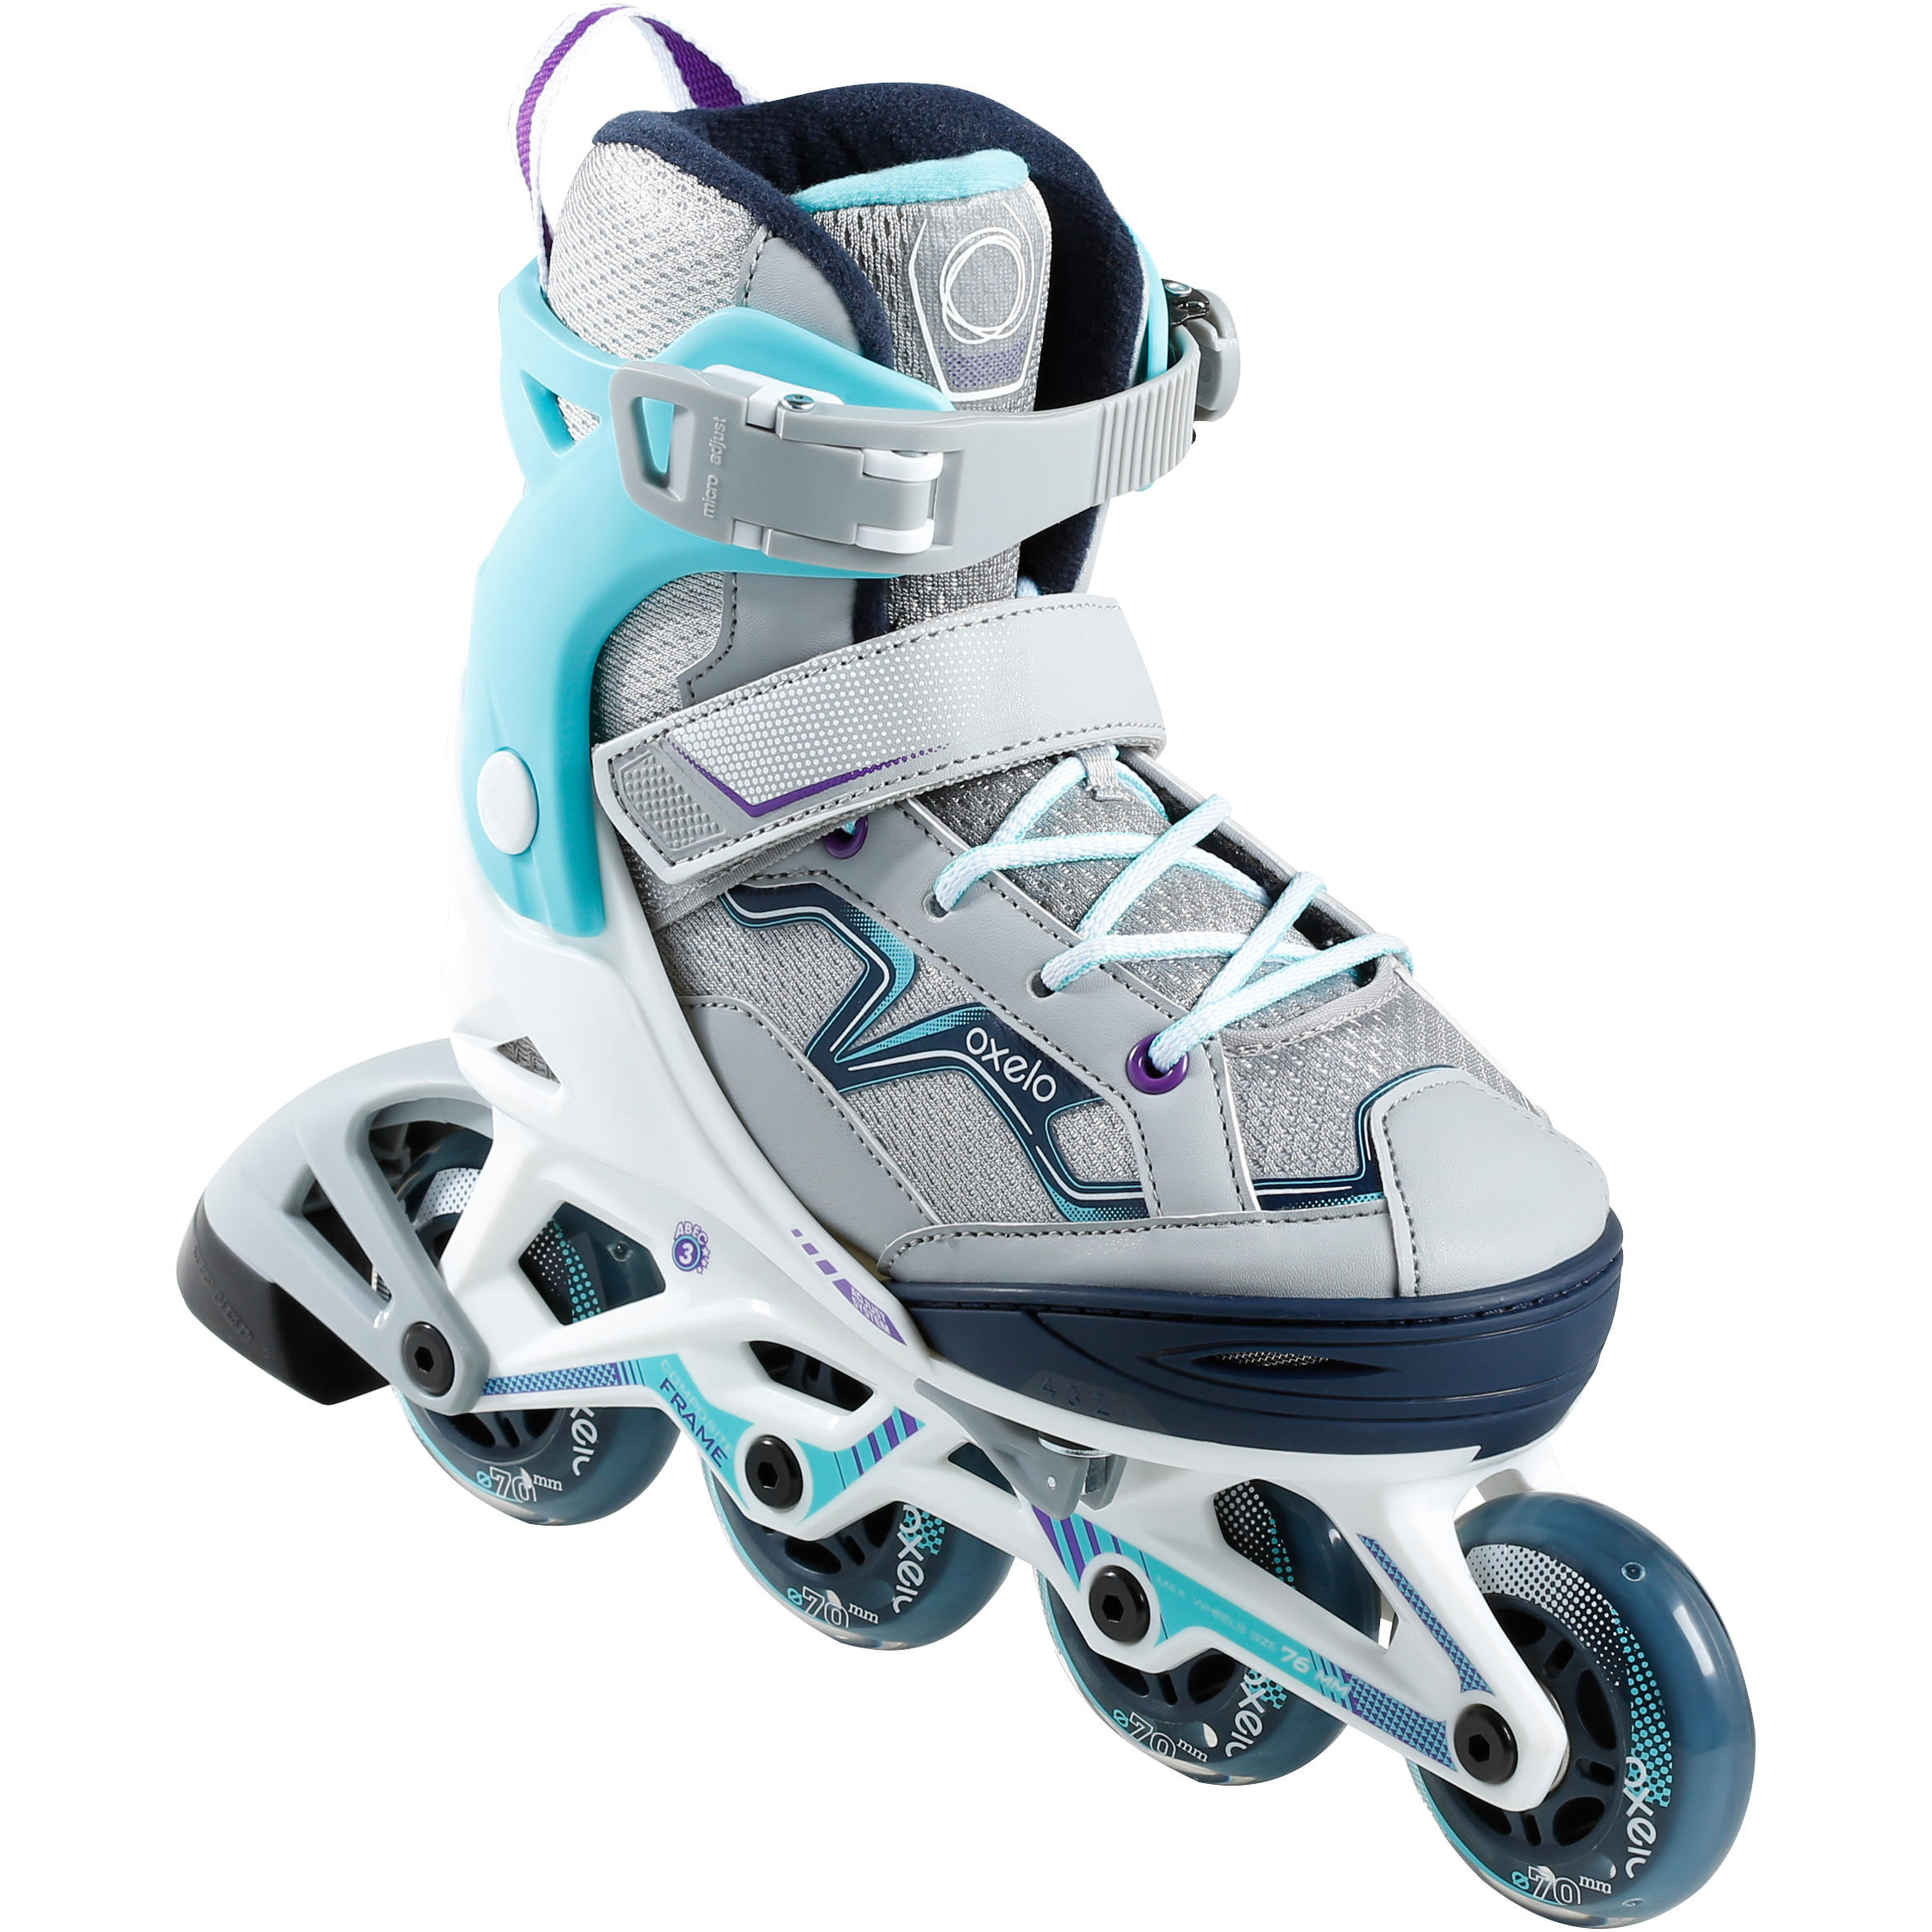 Fit 3 Kids Fitness Skates - Turquoise 